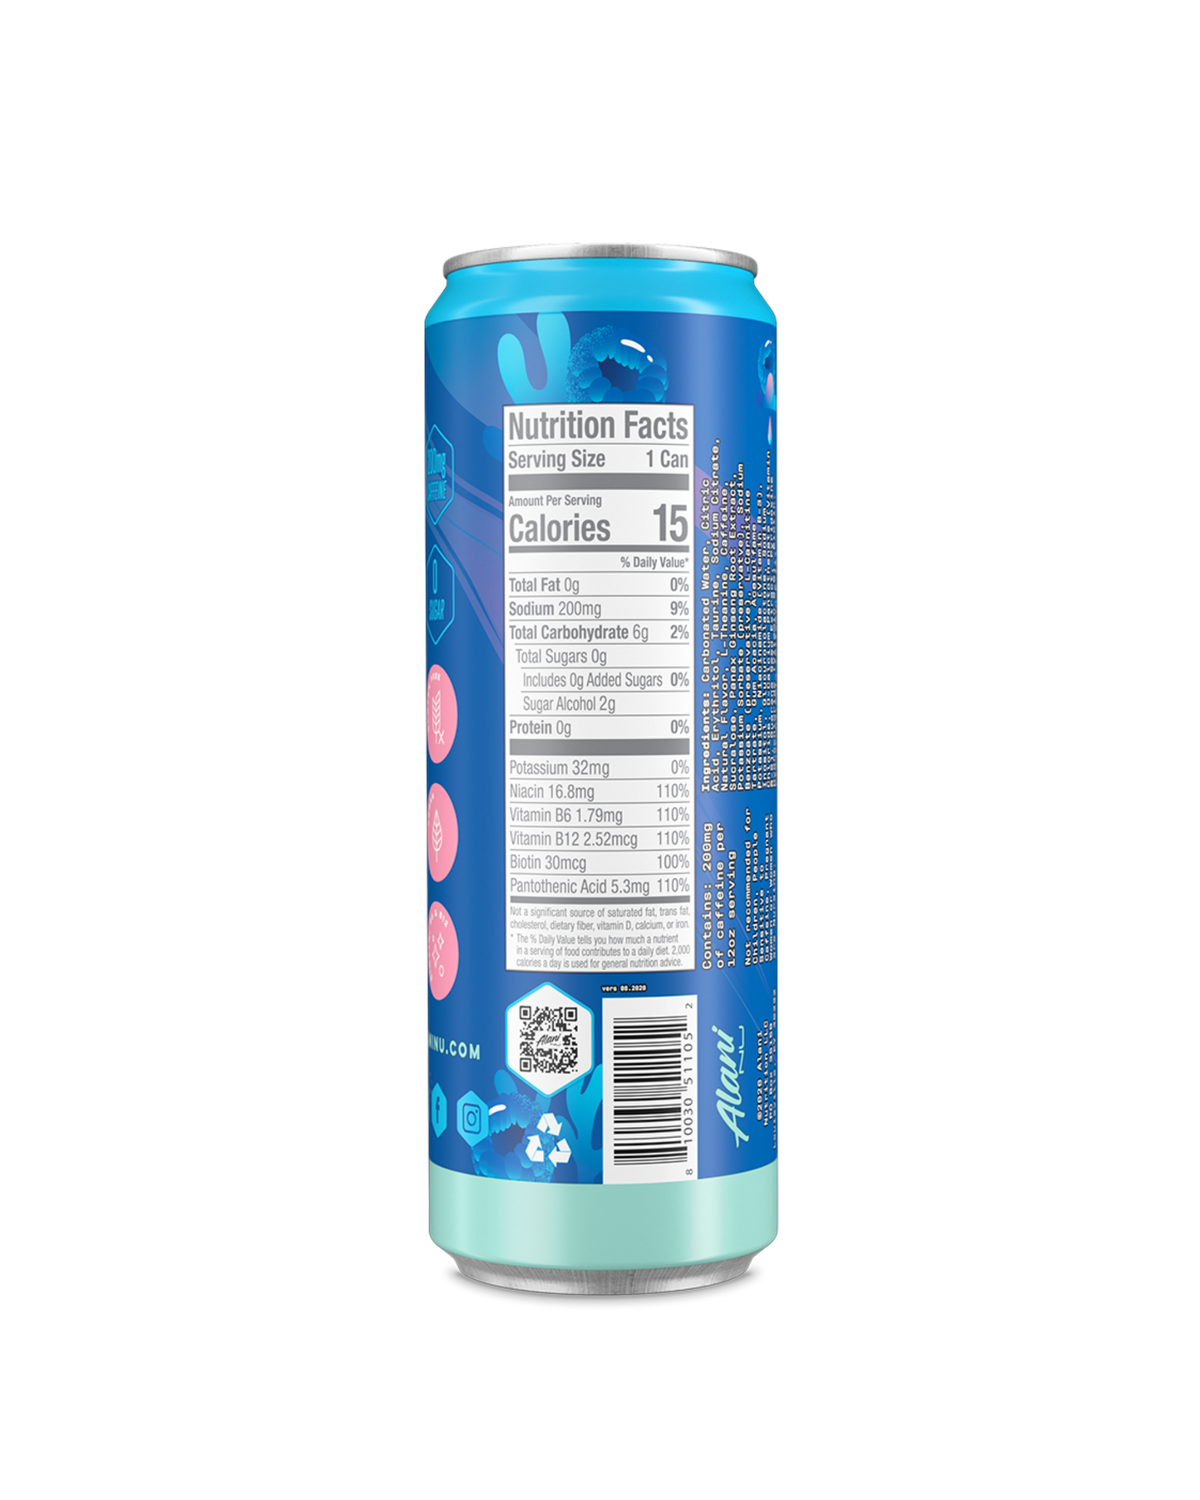 A back view Energy Drink in Breezeberry flavor highlighting nutrition facts.